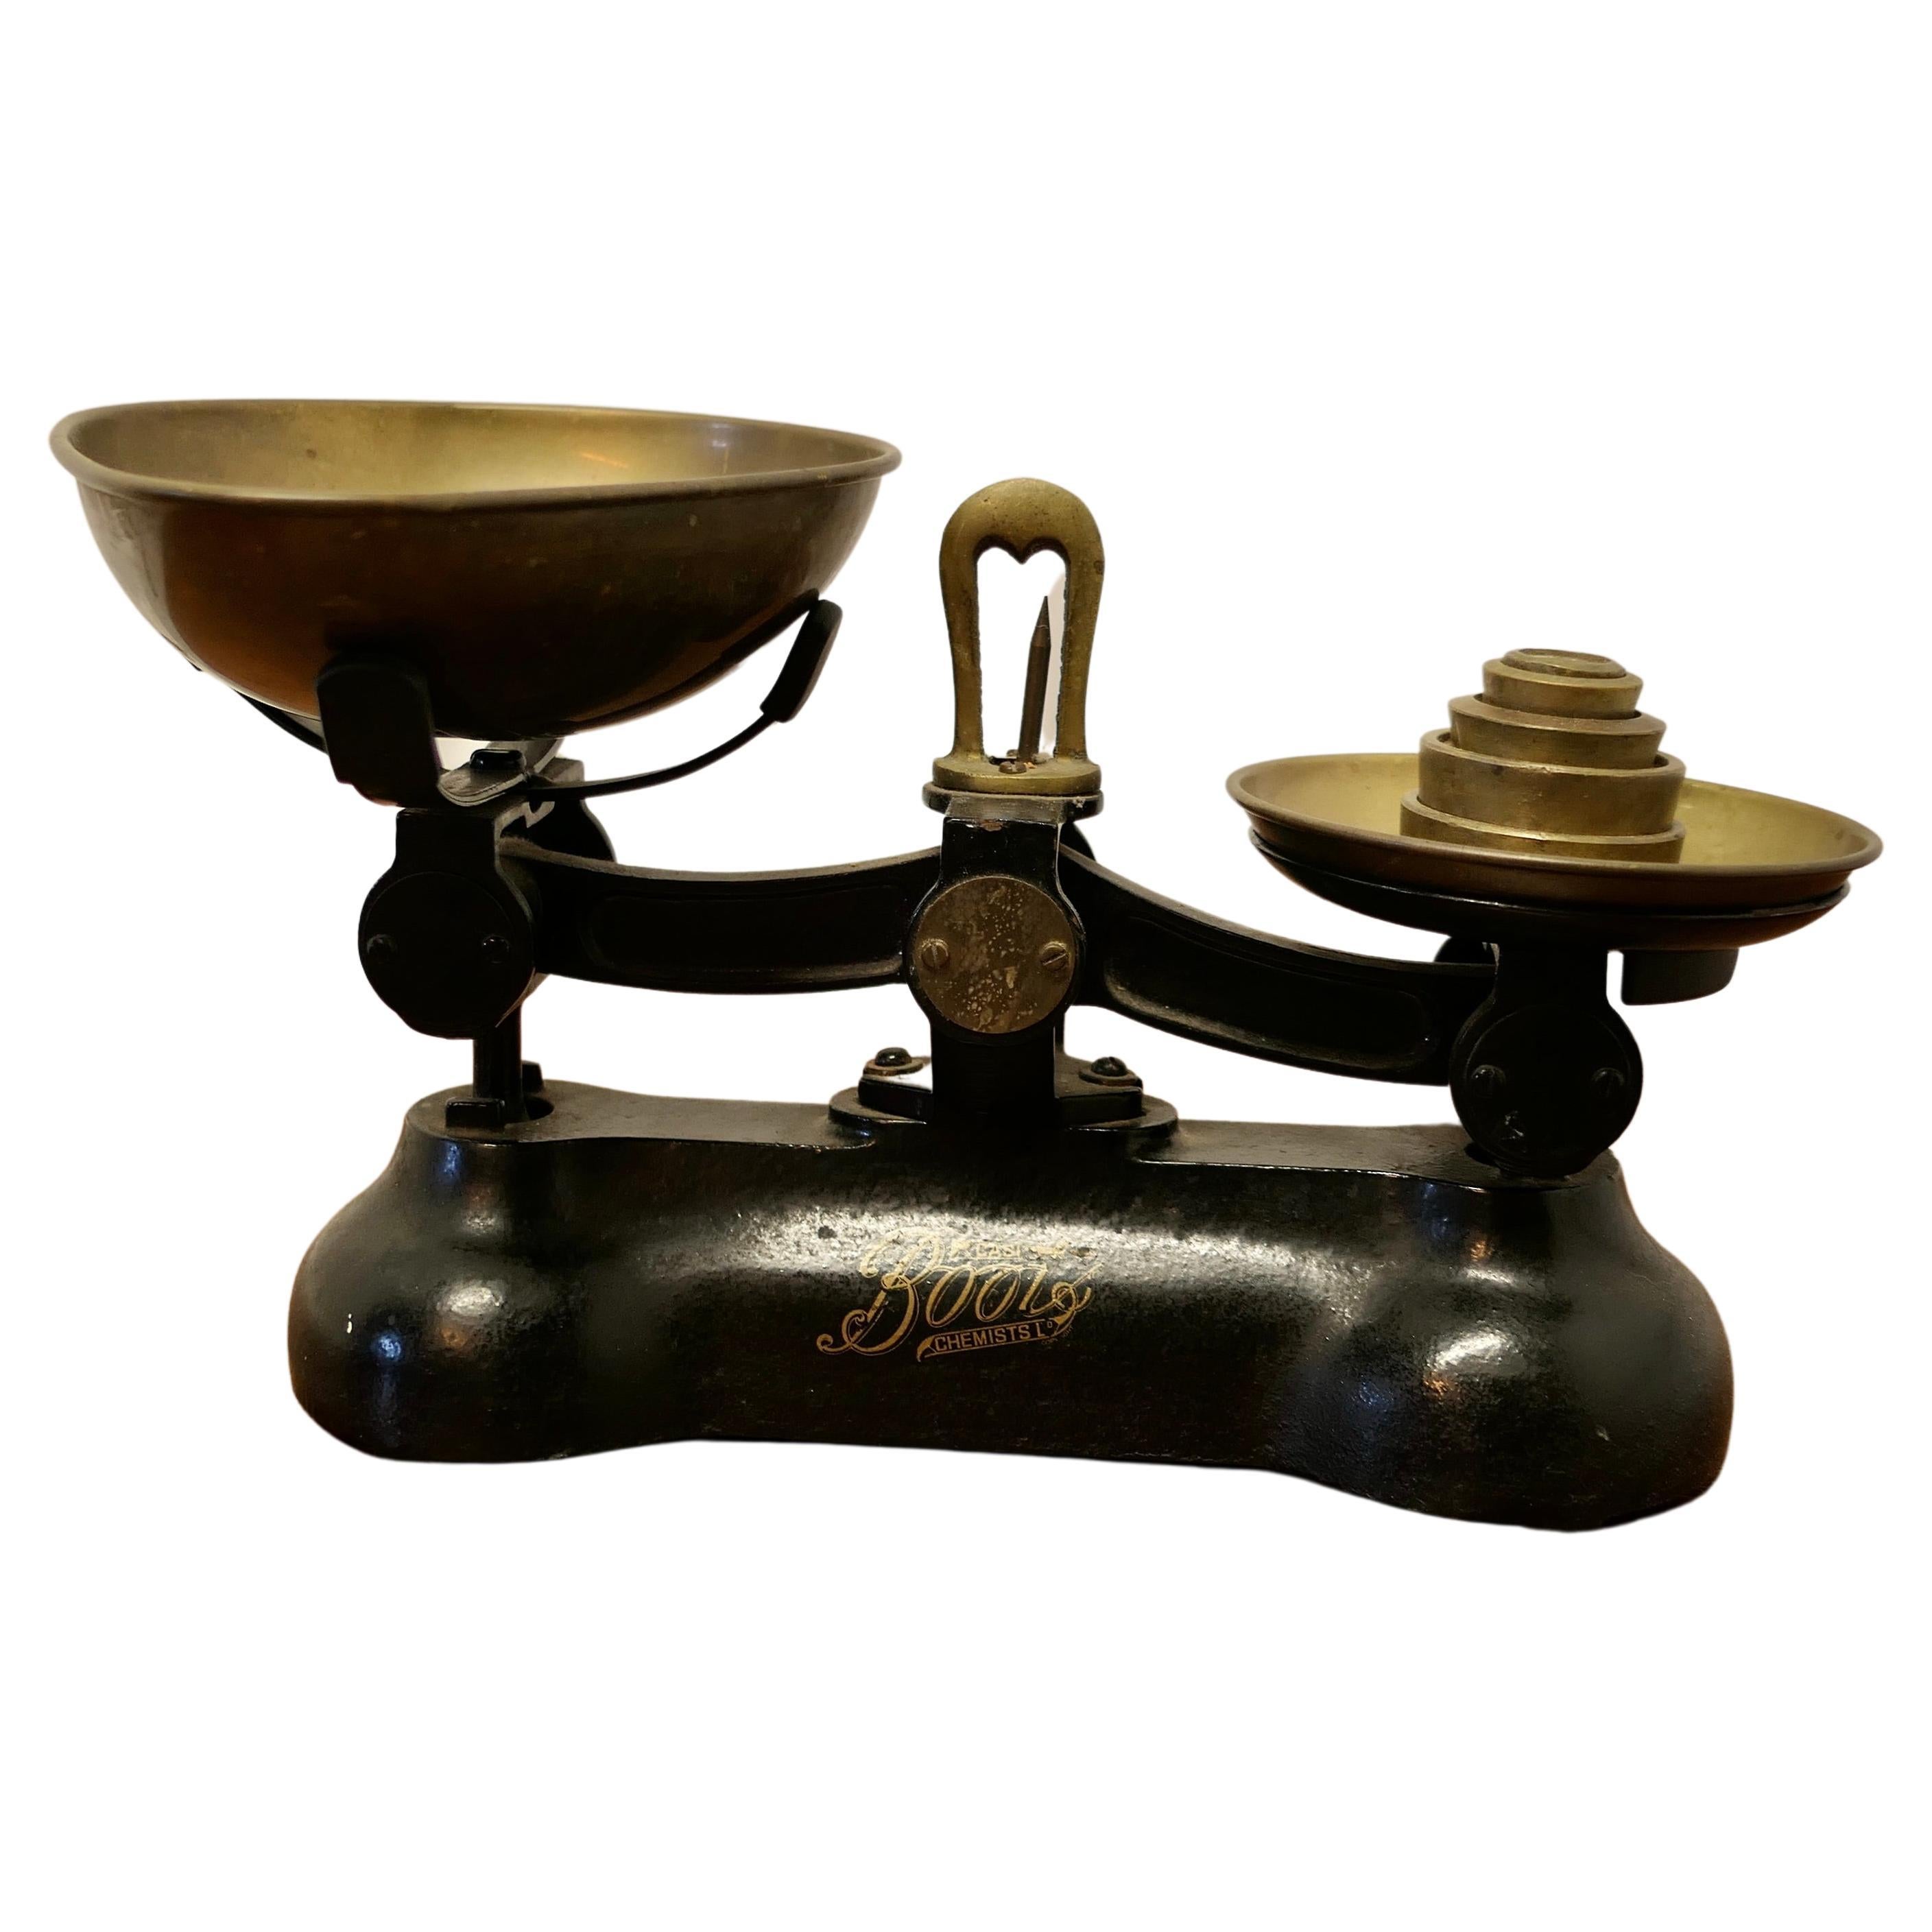 https://a.1stdibscdn.com/victorian-kitchen-balance-scales-from-boots-with-weights-for-sale/f_24983/f_360969921694351226662/f_36096992_1694351227792_bg_processed.jpg